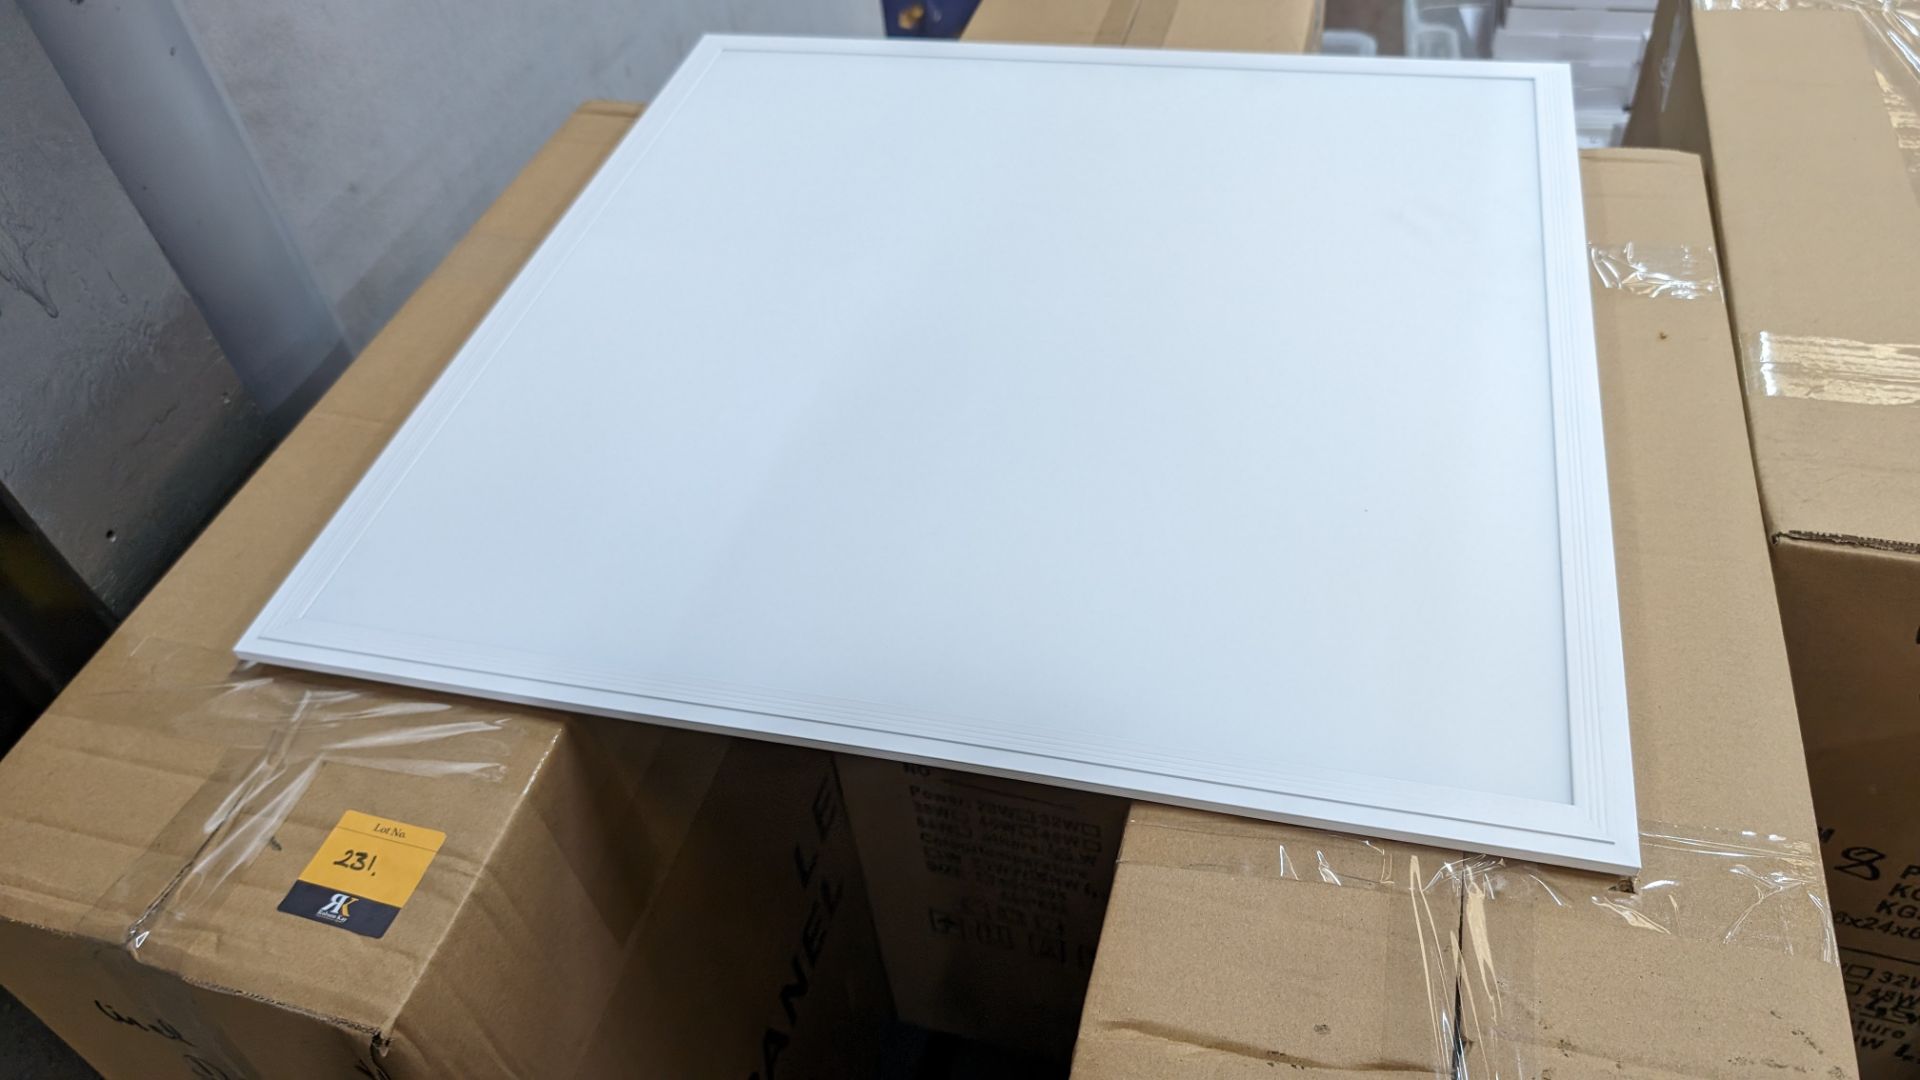 24 off 595mm x 595mm 4000k 45w LED lighting panel, each including driver. This lot comprises 3 cart - Image 3 of 5